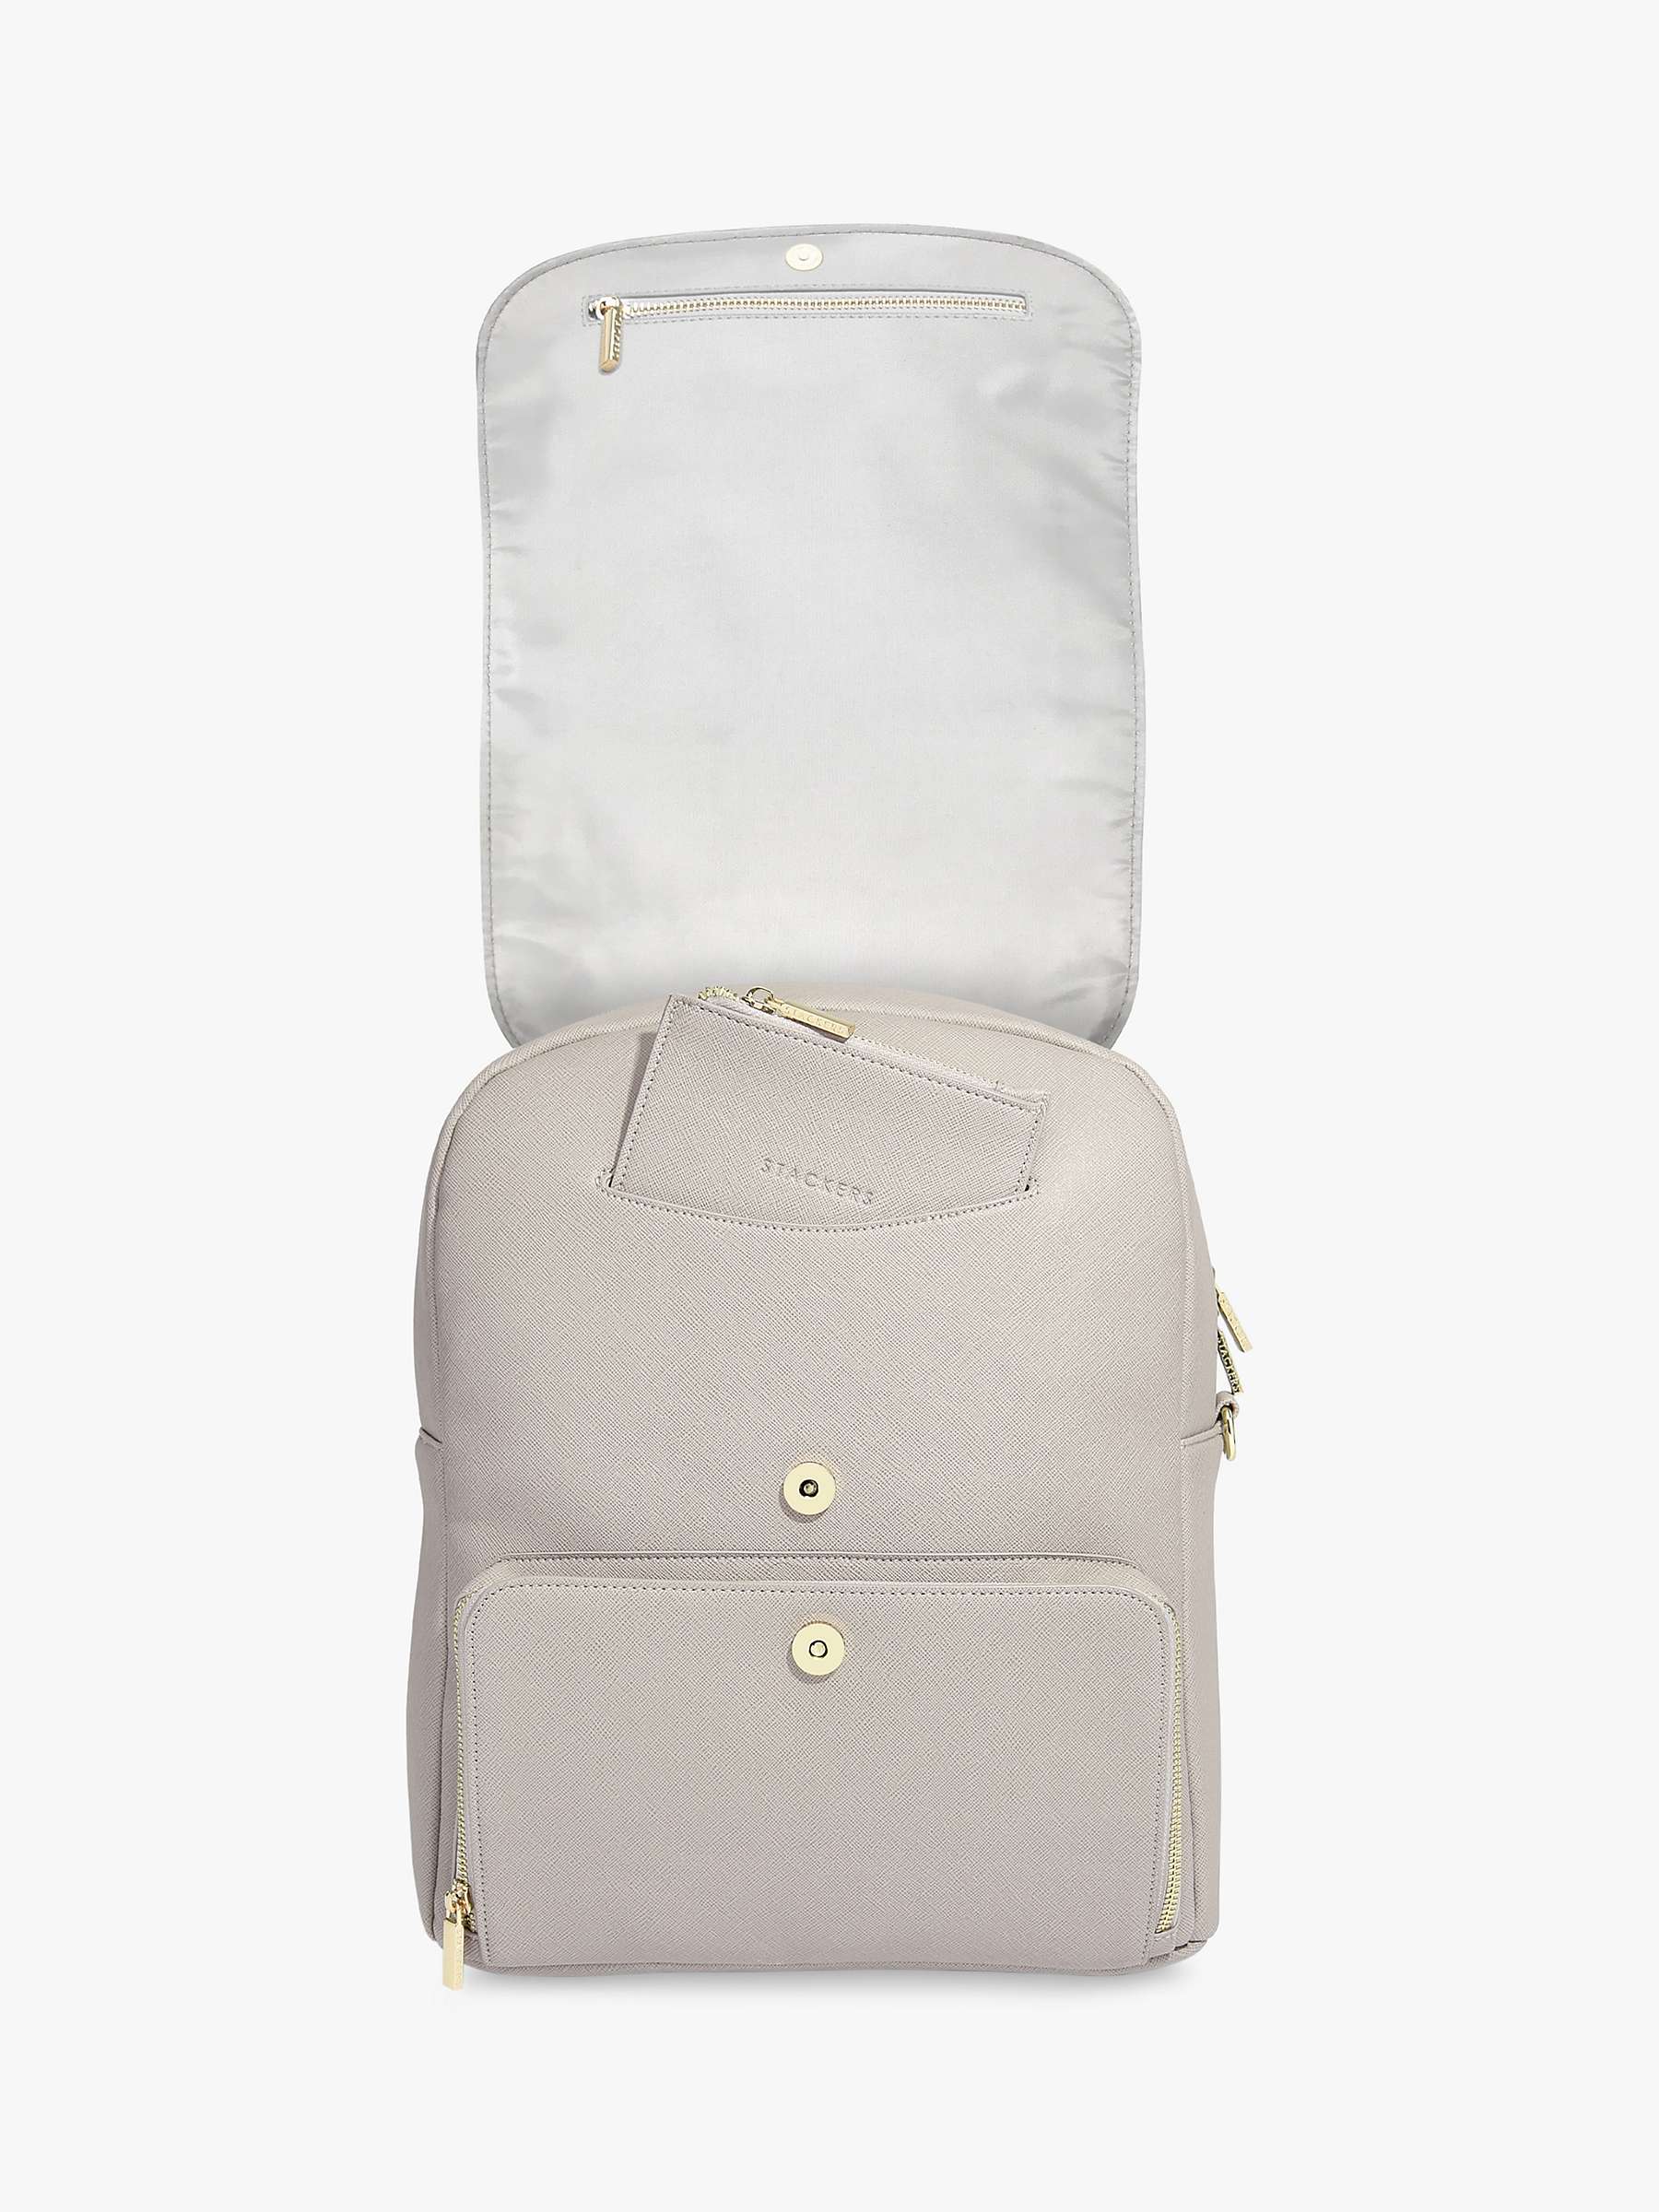 Buy Stackers Plain Laptop Backpack Online at johnlewis.com